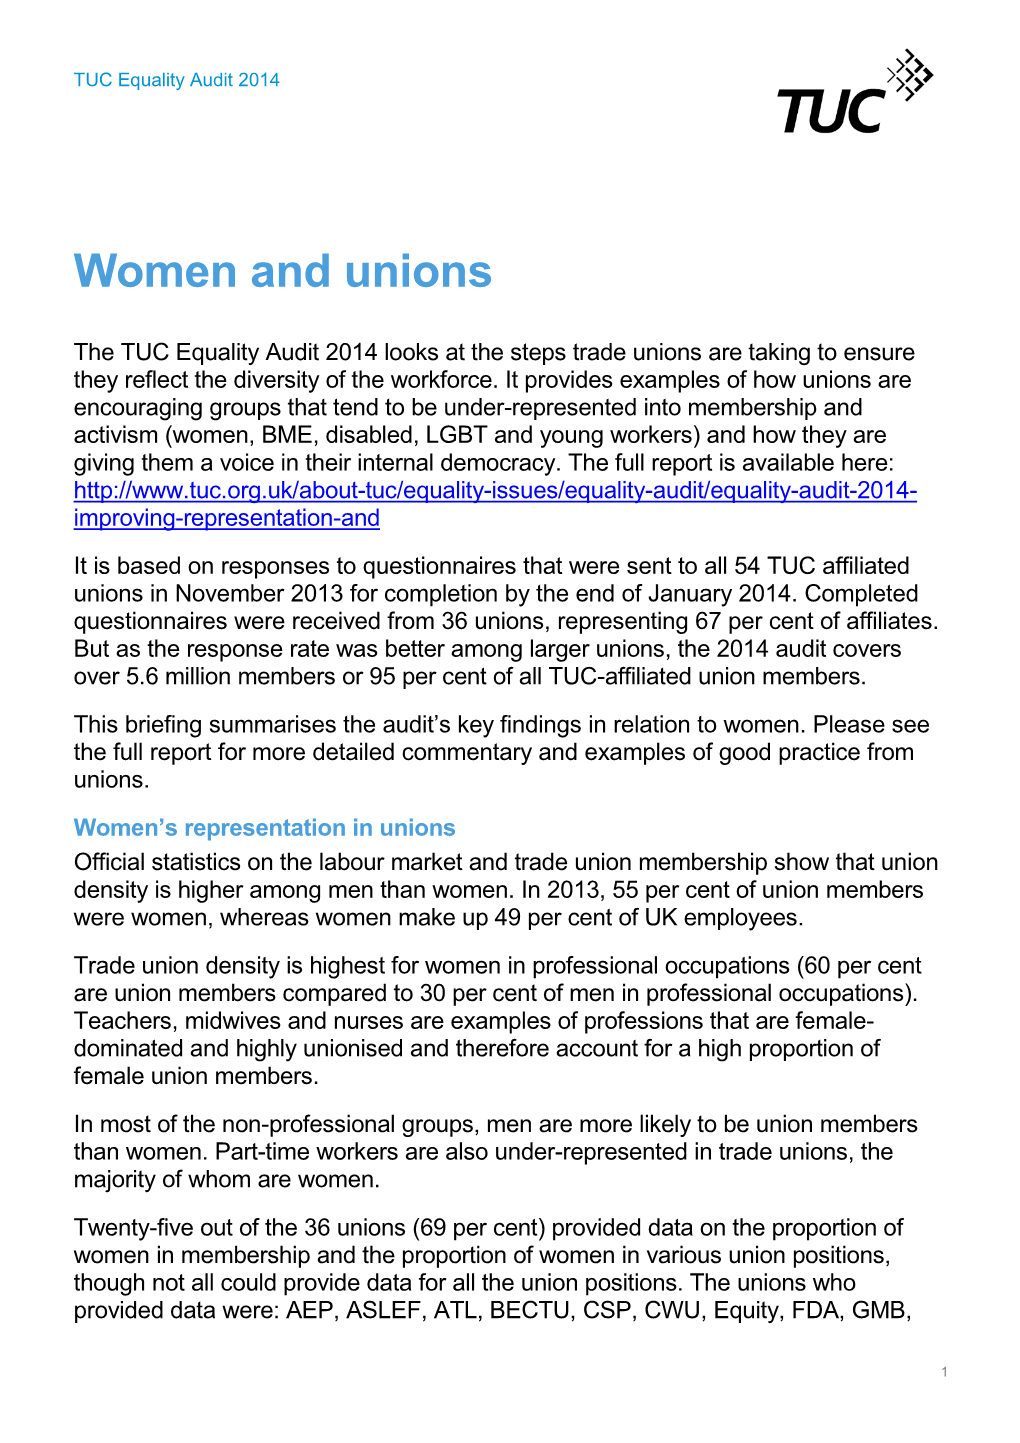 Women and Unions